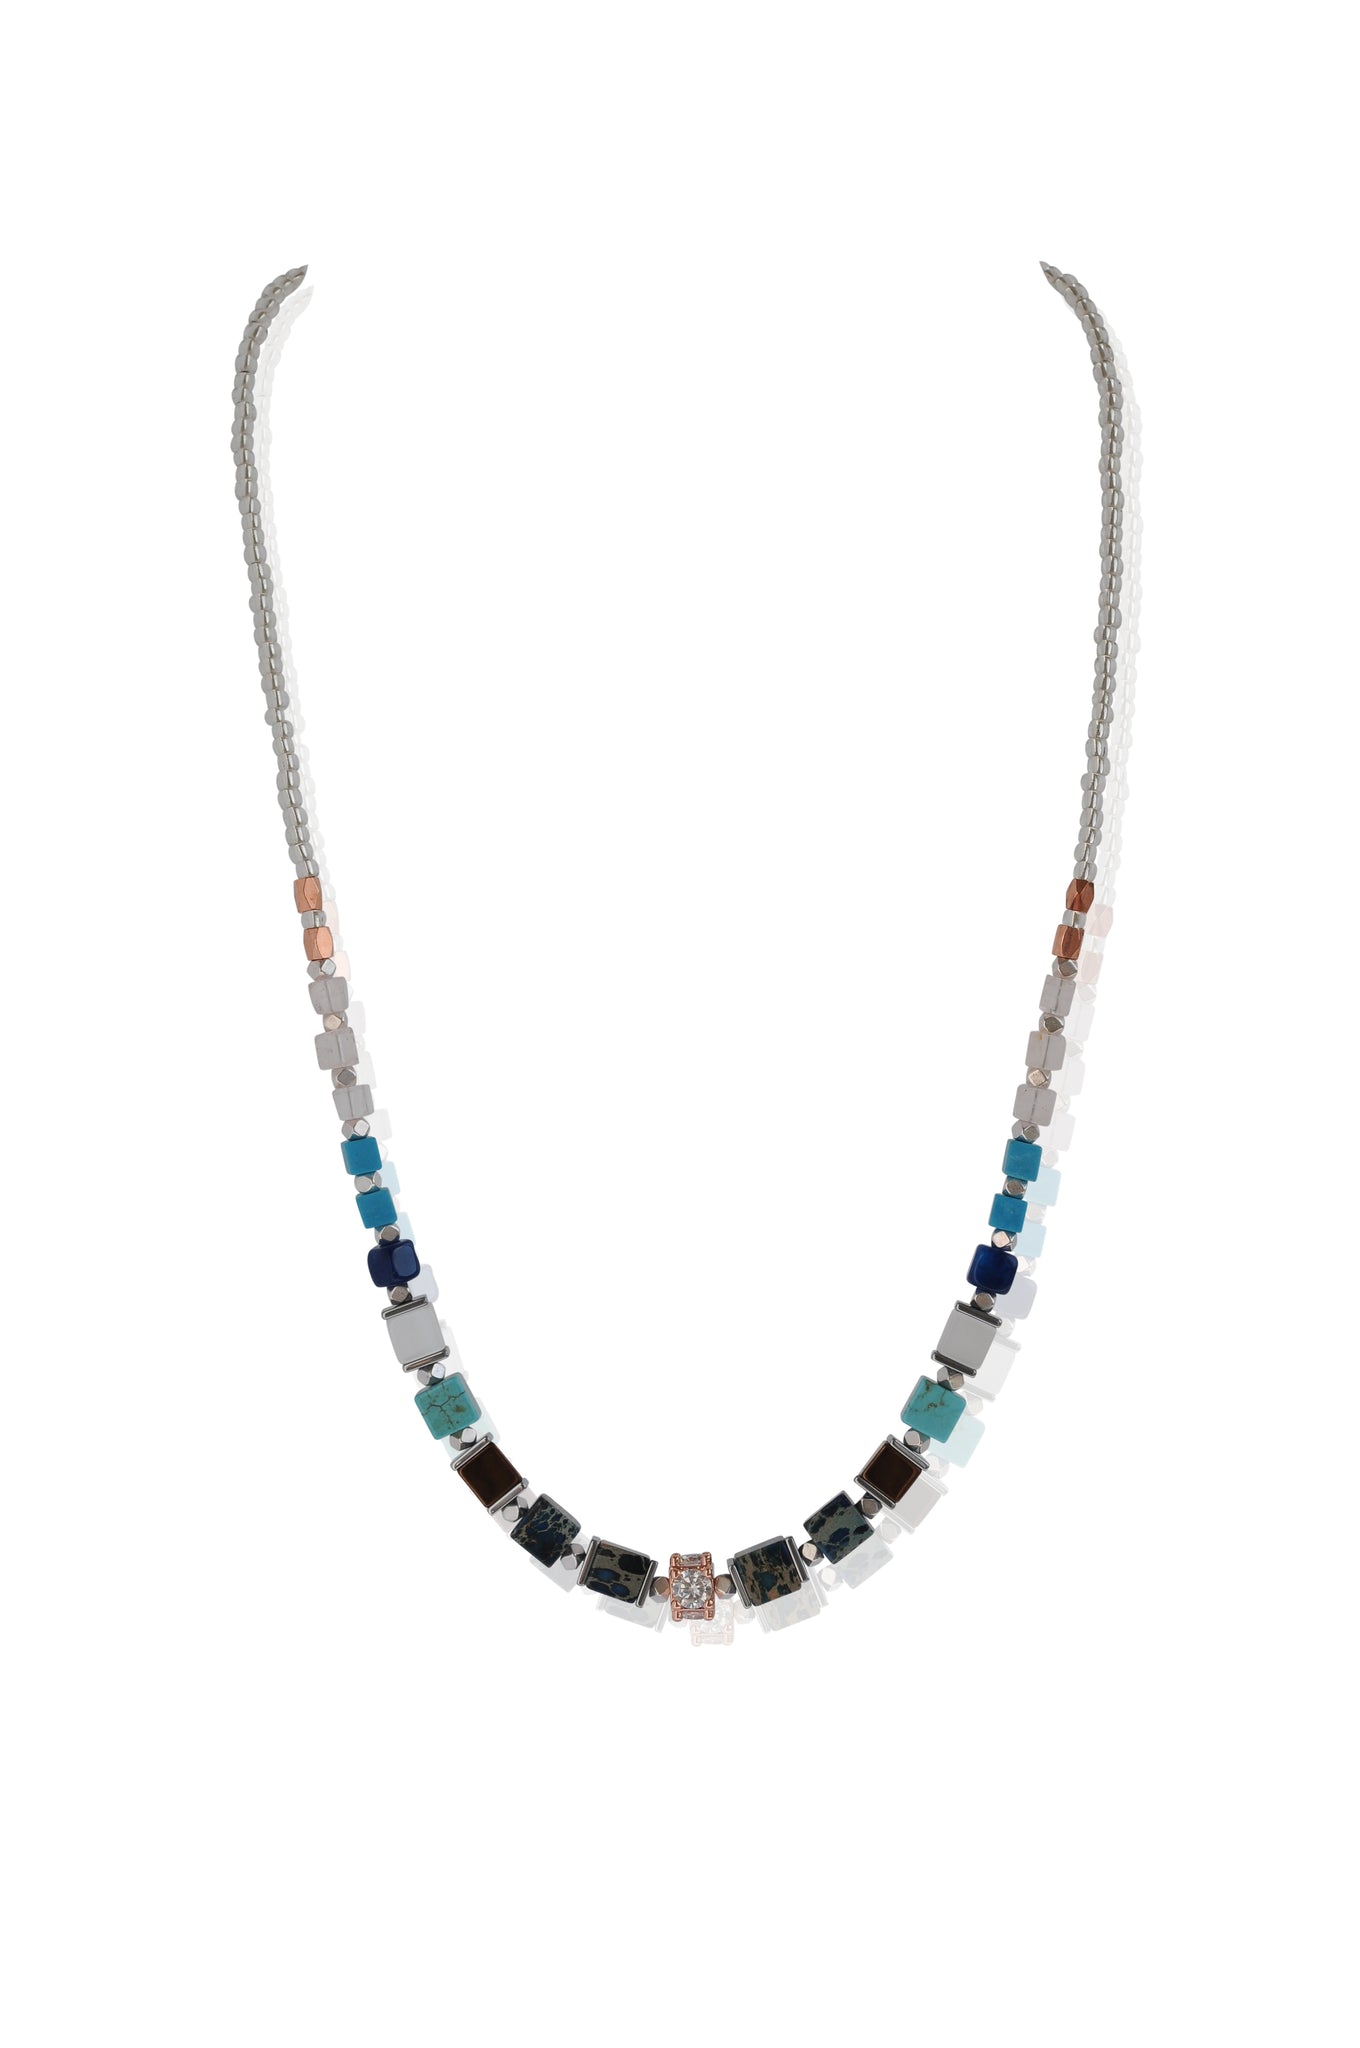 Cubic Zirconia agate necklace